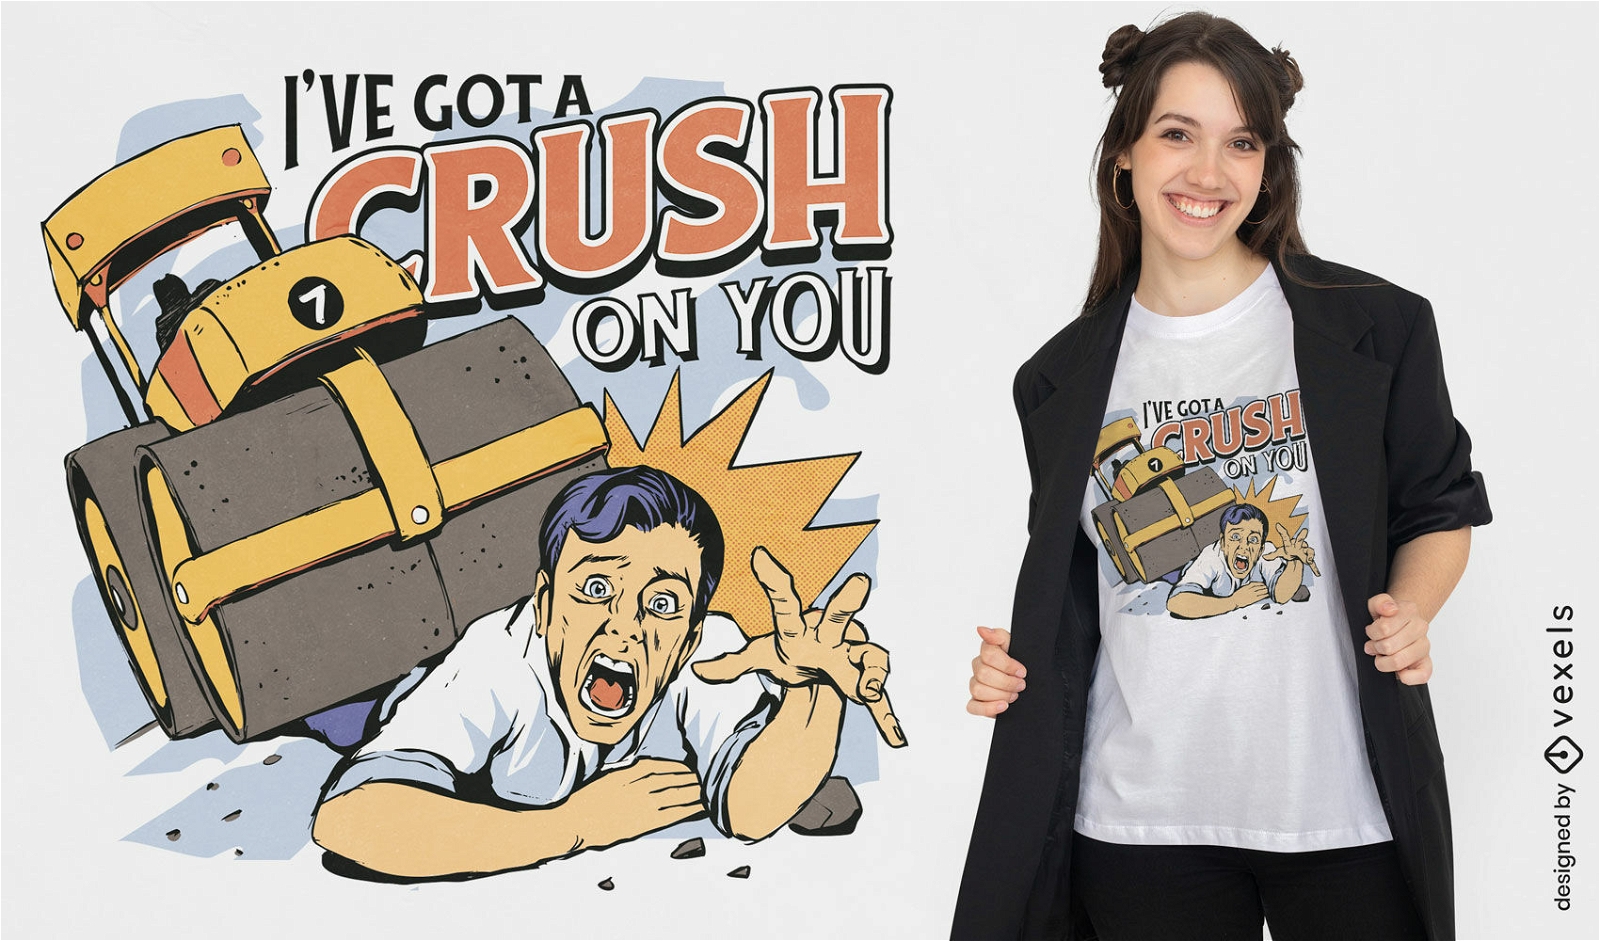 Steamroller crush on you quote t-shirt design